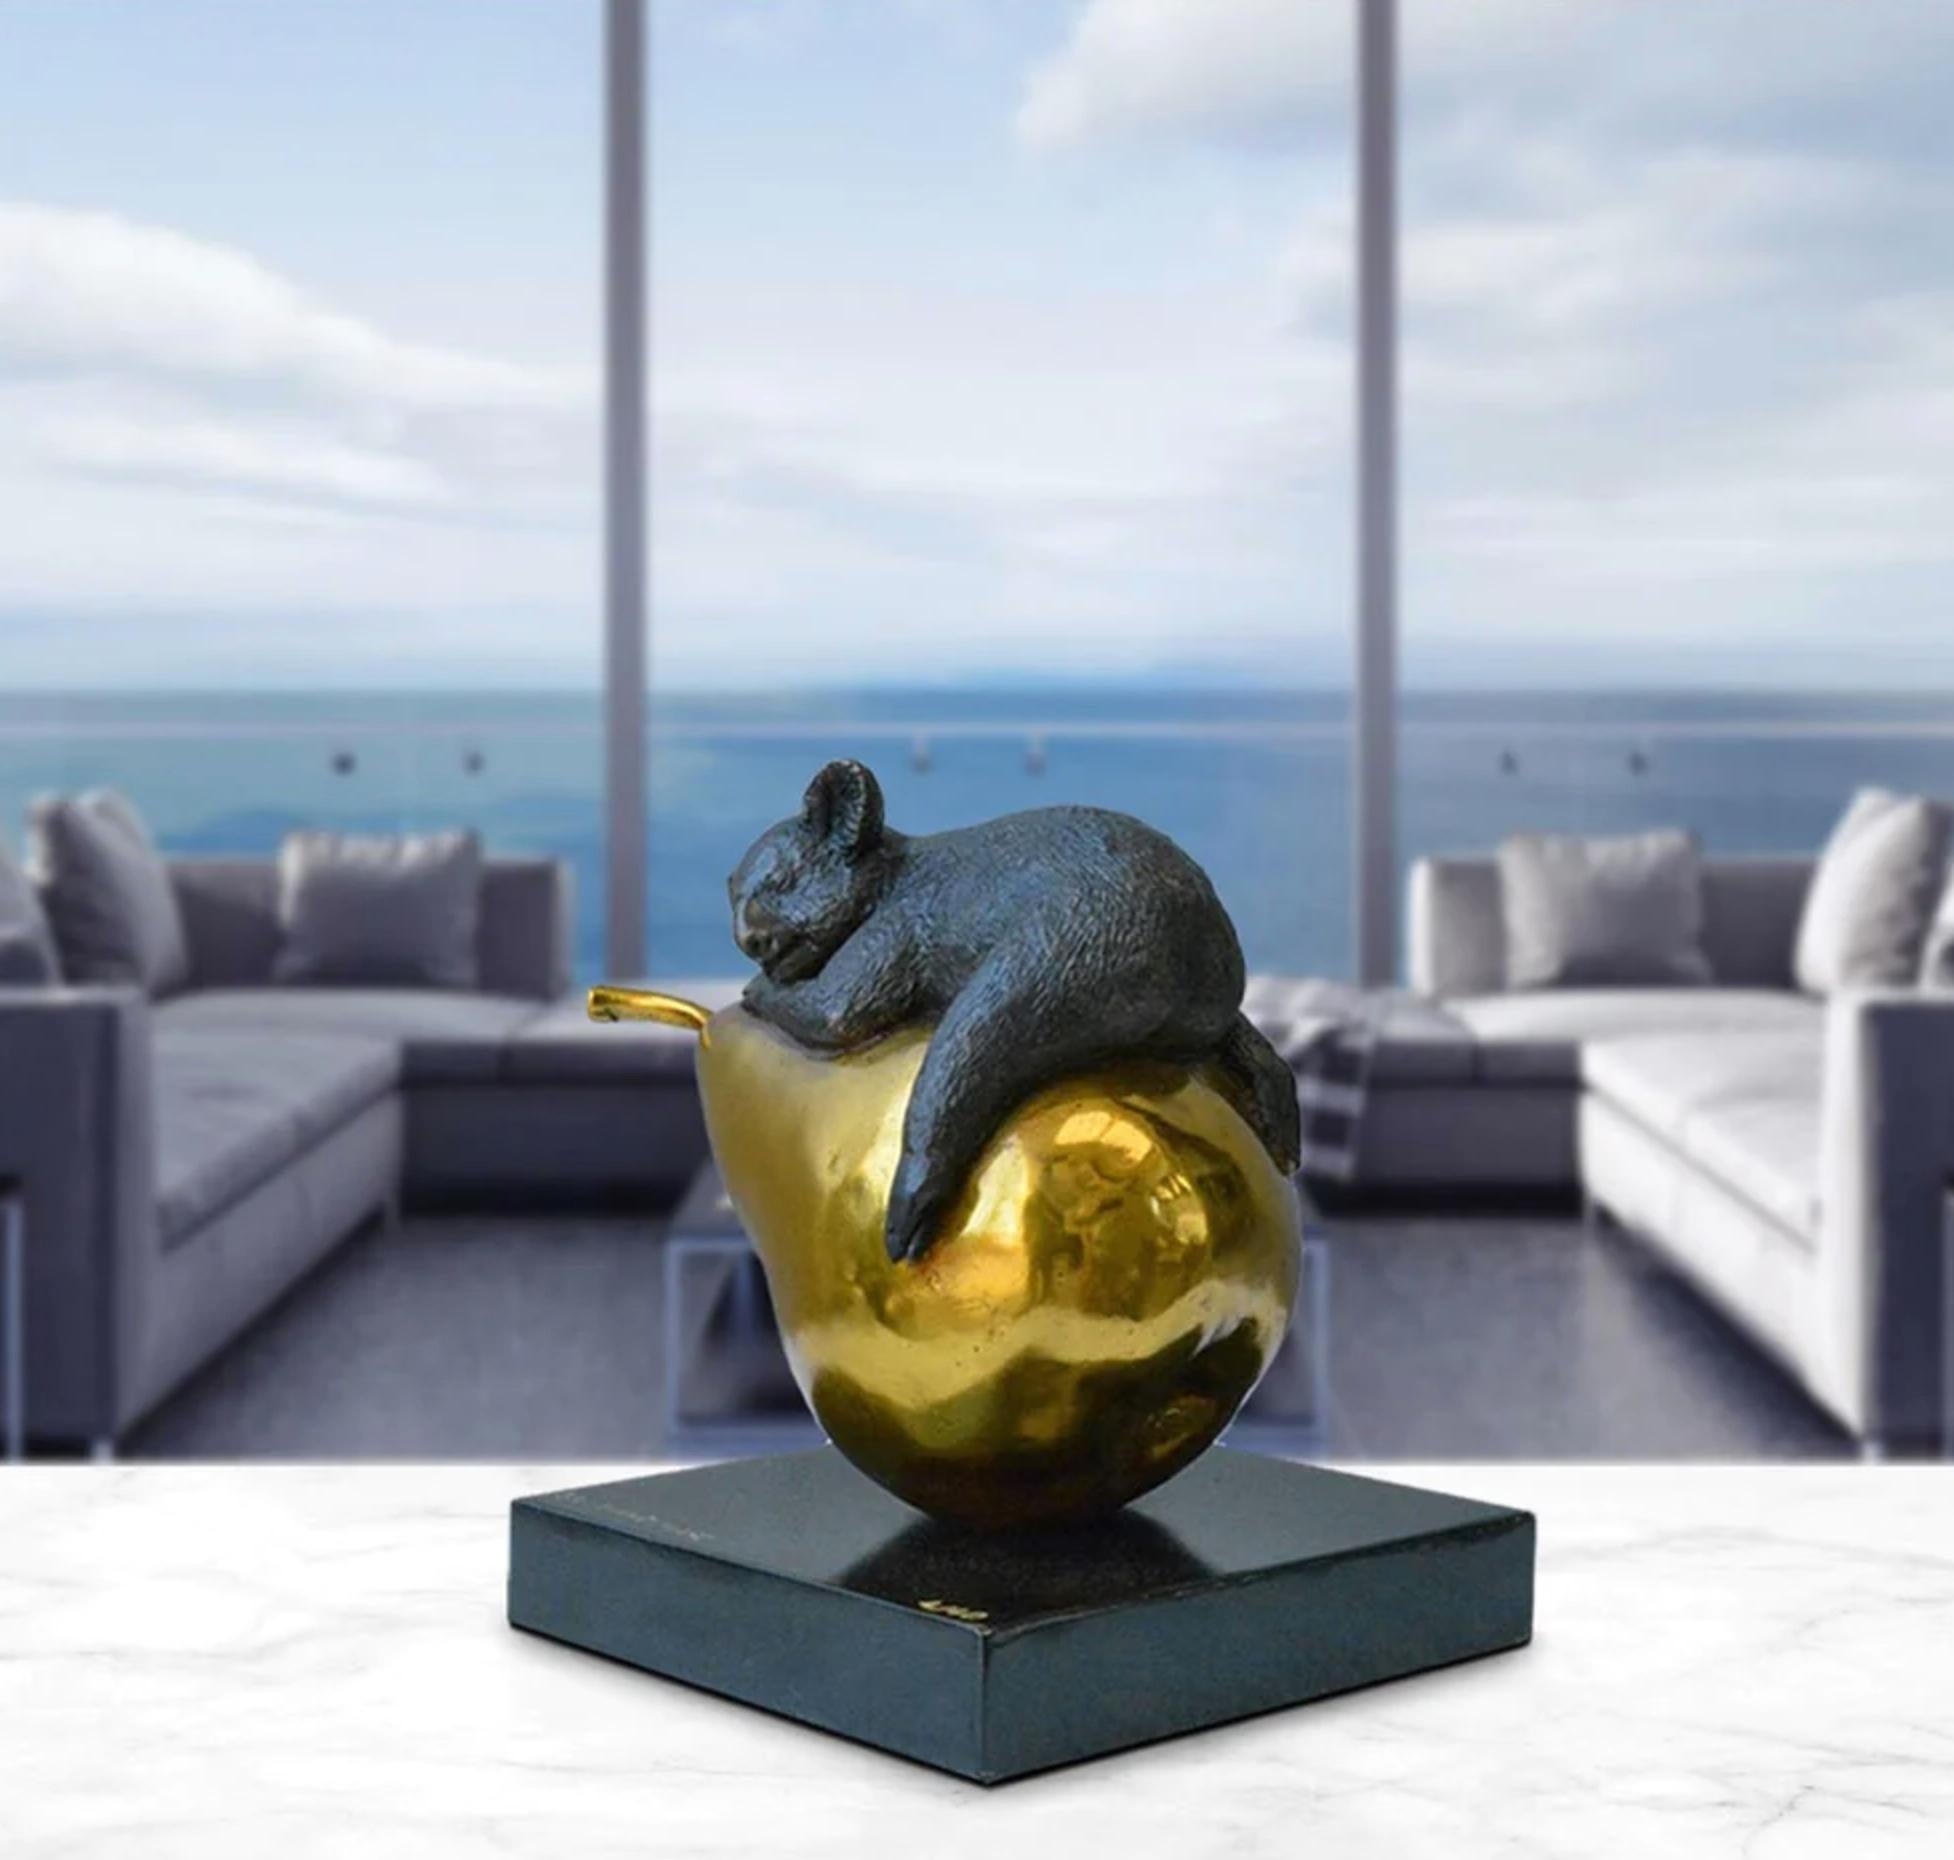 Title: Koalas will pear for life
Authentic bronze sculpture with Gold Patina

This authentic bronze sculpture titled 'Koalas will pear for life' by artists Gillie and Marc has been meticulously crafted in bronze with gold patina. It features a koala